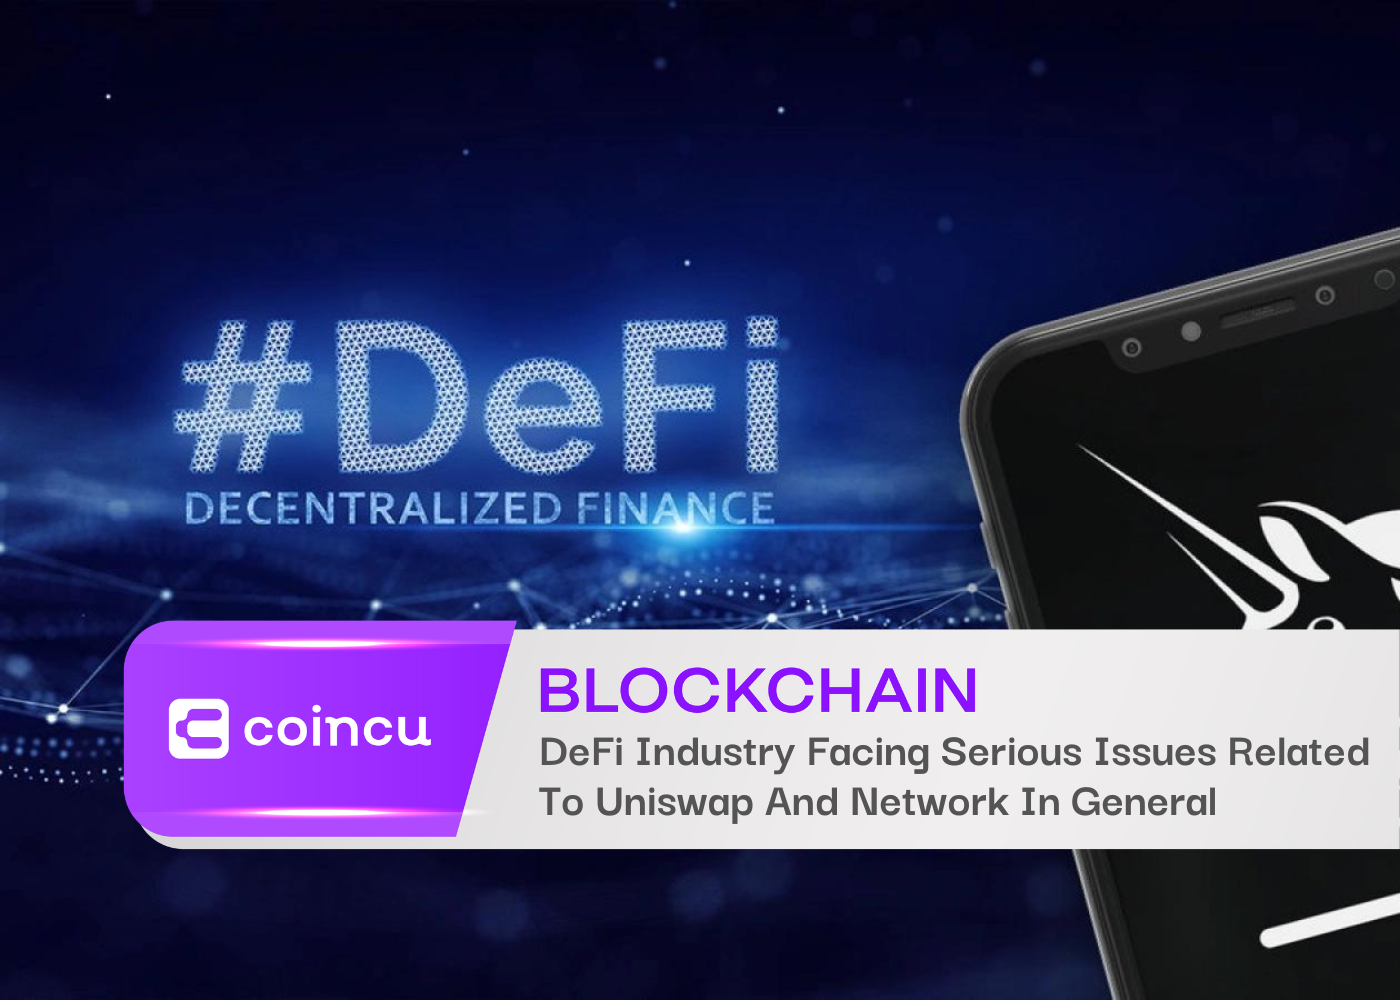 DeFi Industry Facing Serious Issues Related To